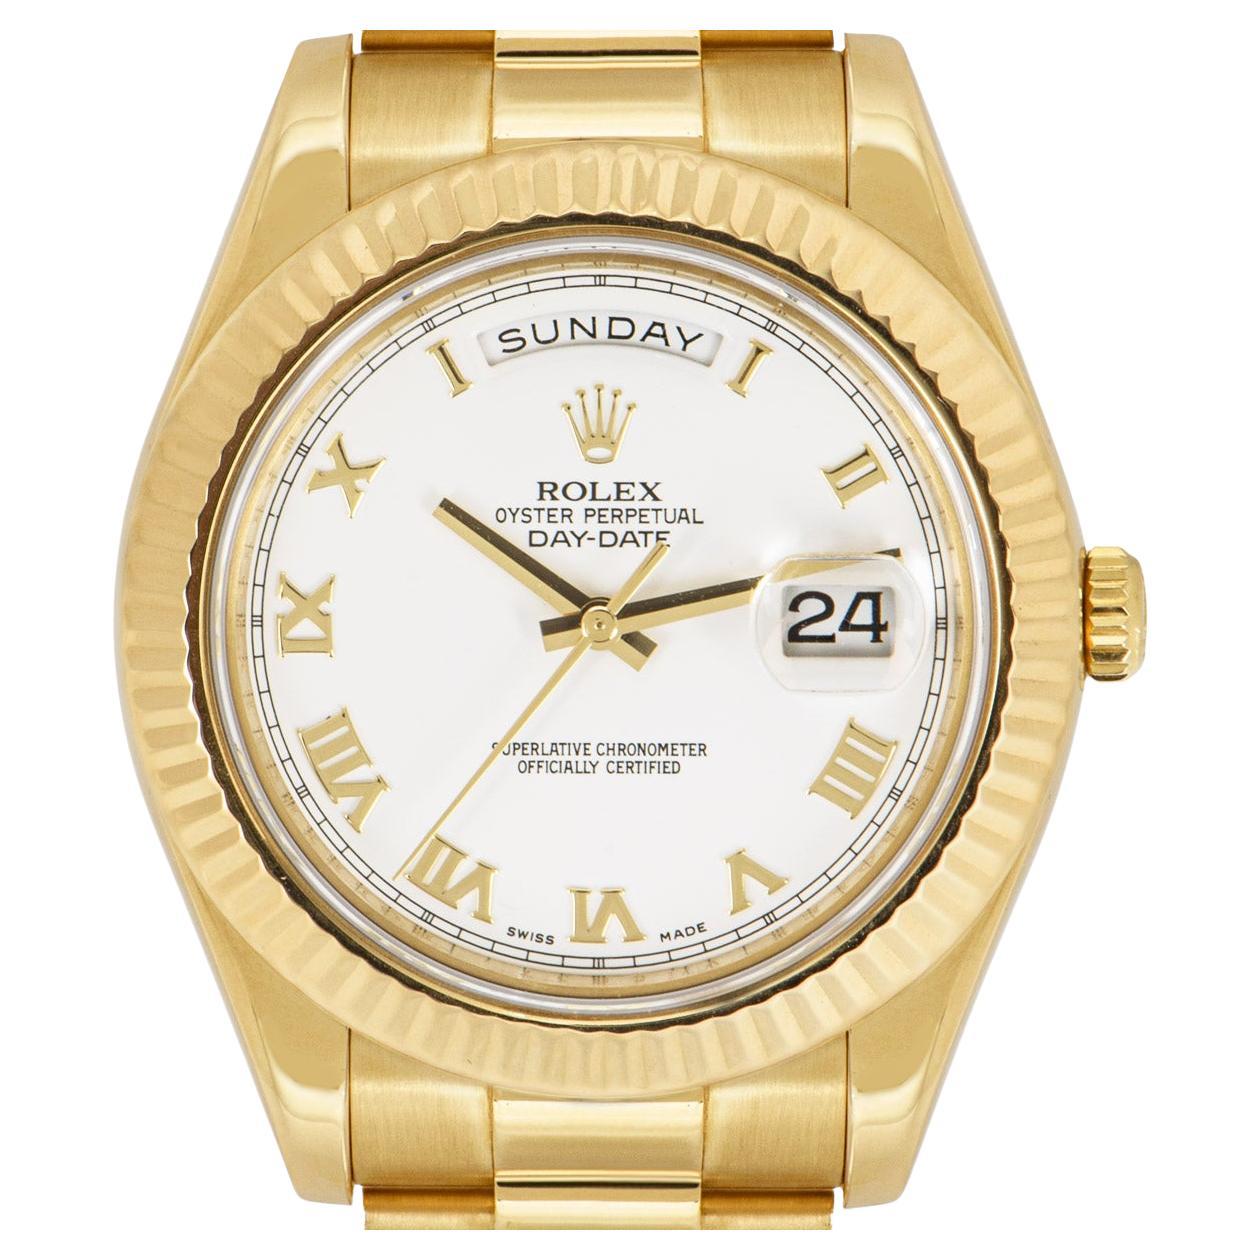 A yellow gold Day-Date II by Rolex. Featuring a white dial with roman applied numerals and a fluted yellow gold bezel. Fitted with a sapphire glass, a self-winding automatic movement and a yellow gold president bracelet set with a concealed folding